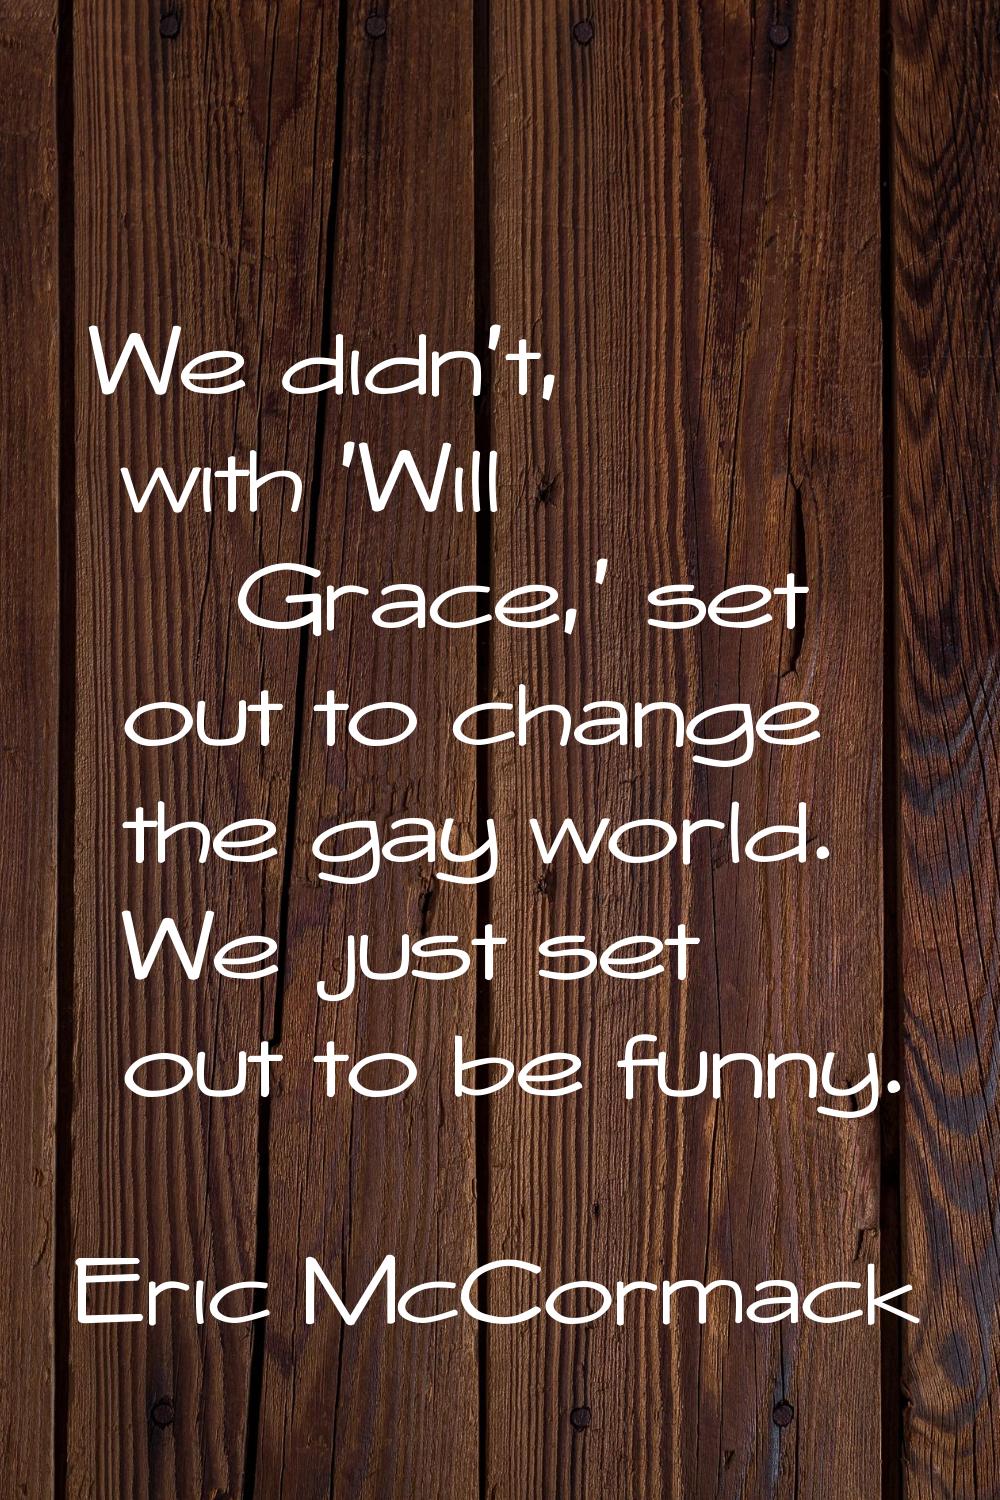 We didn't, with 'Will & Grace,' set out to change the gay world. We just set out to be funny.